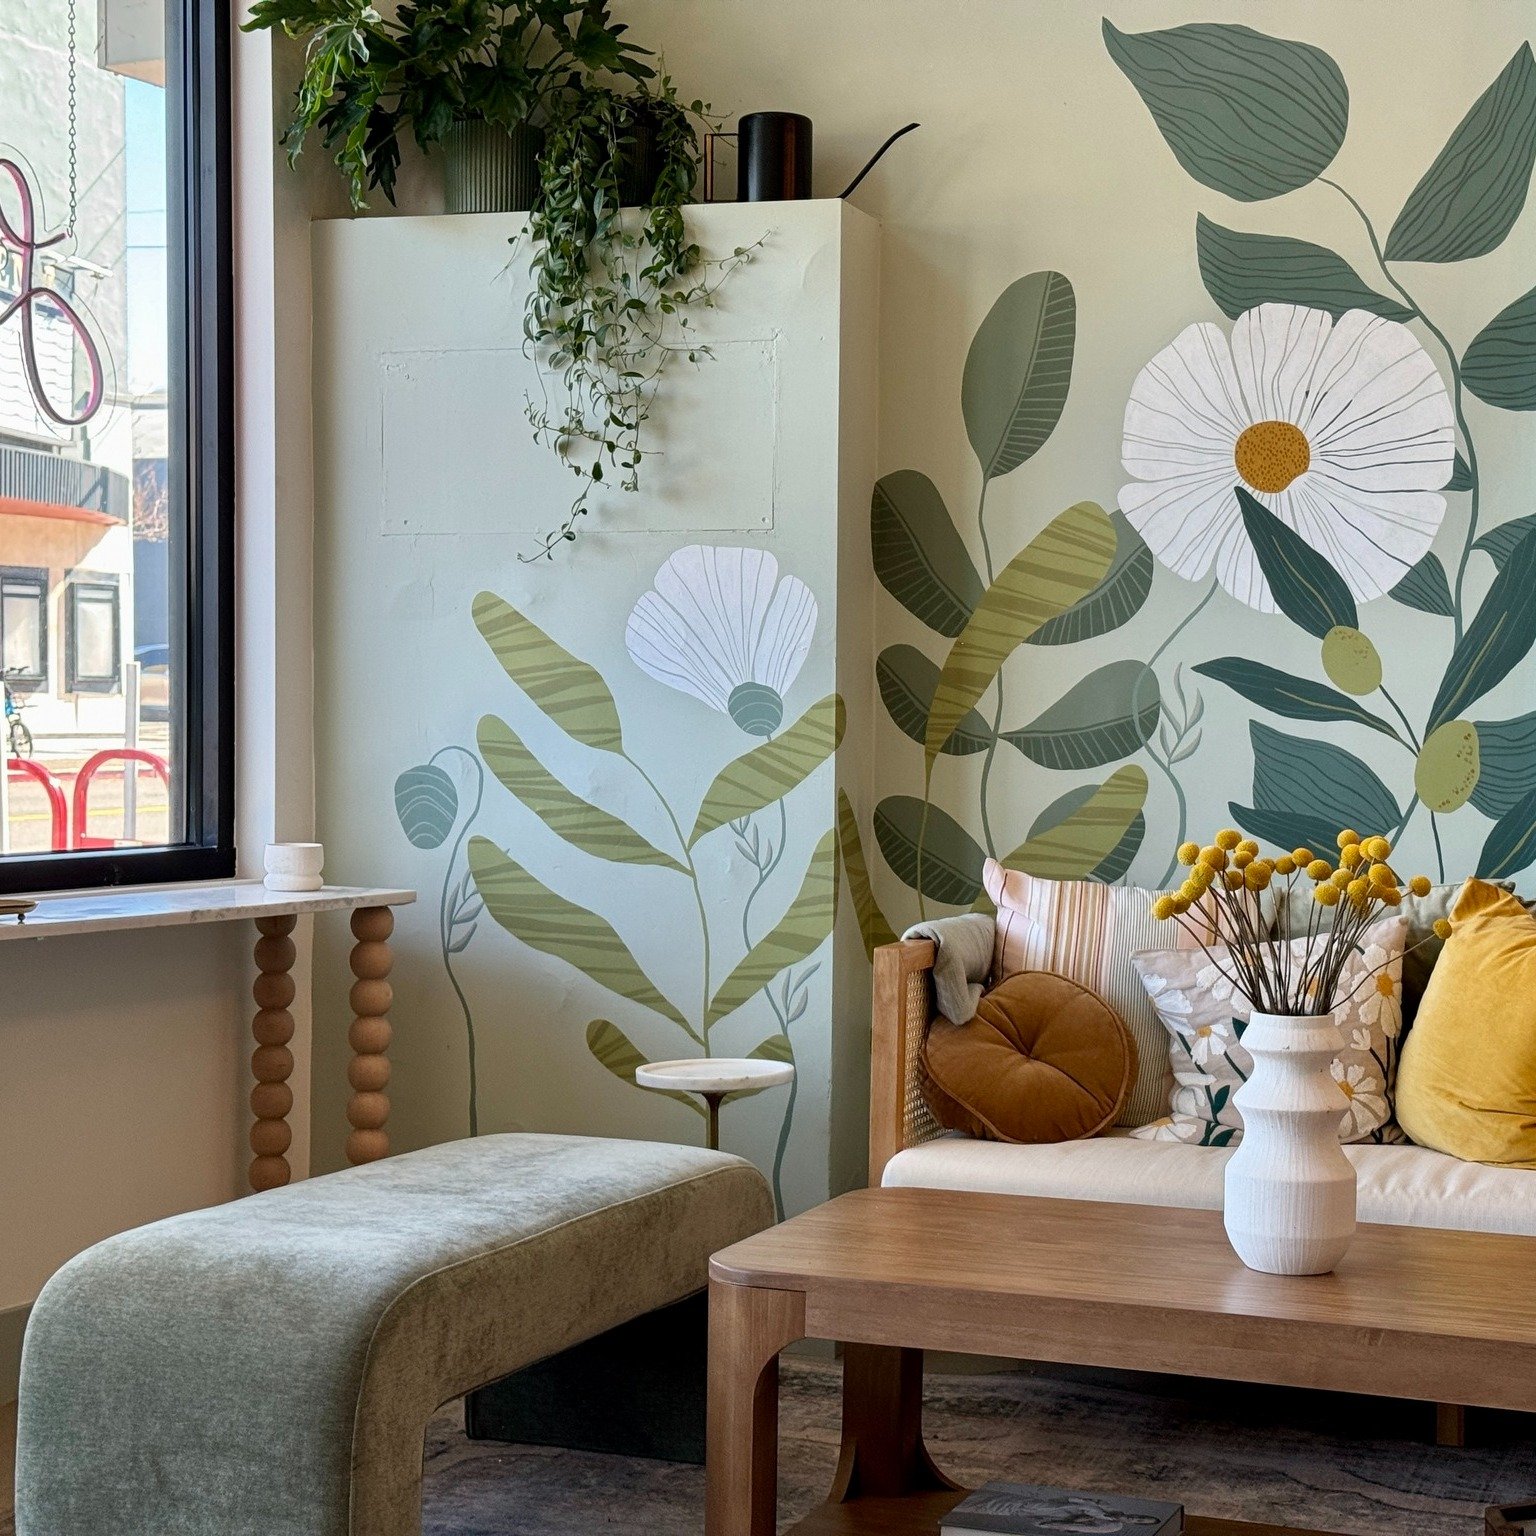 Went to the grand opening of @luluonsolano in Albany, and we were lucky enough to meet the designer @thislittlestreet.design  who brought this space to life. In love with these inspired colors and hand painted murals! #interiordesign